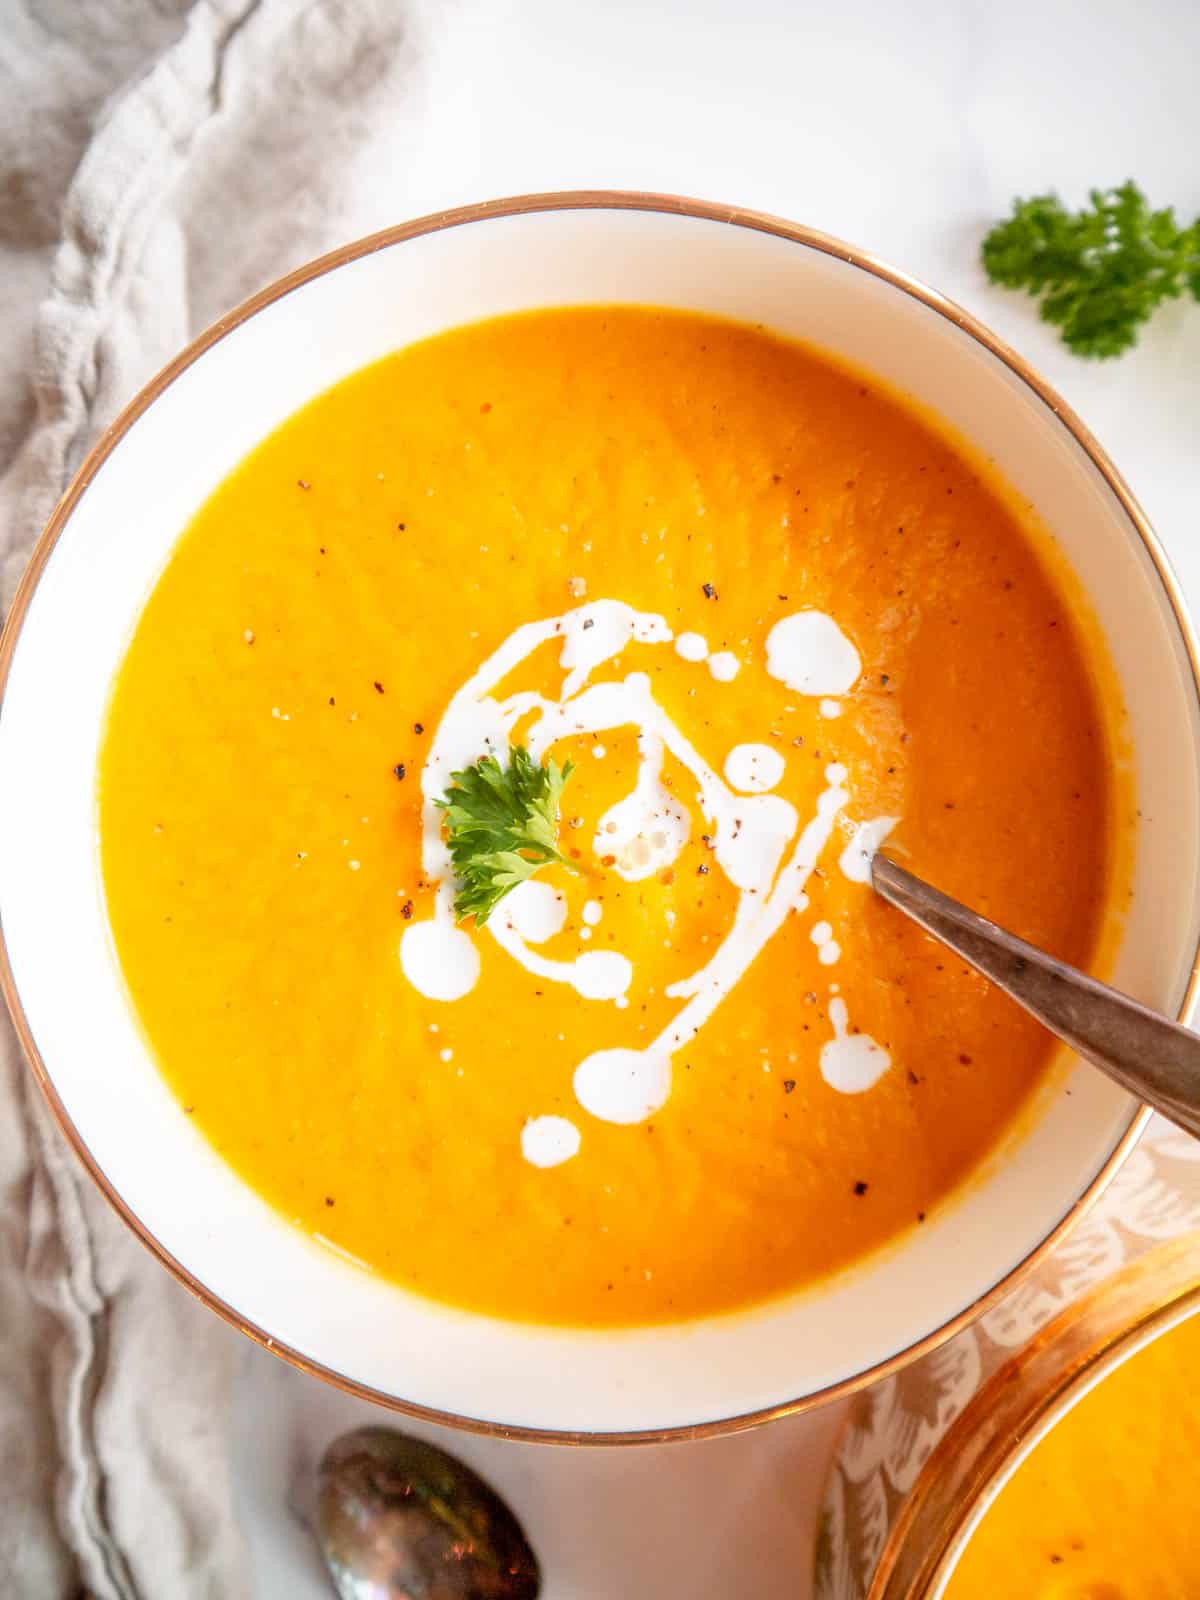 Butternut squash and carrot soup in a bowl.